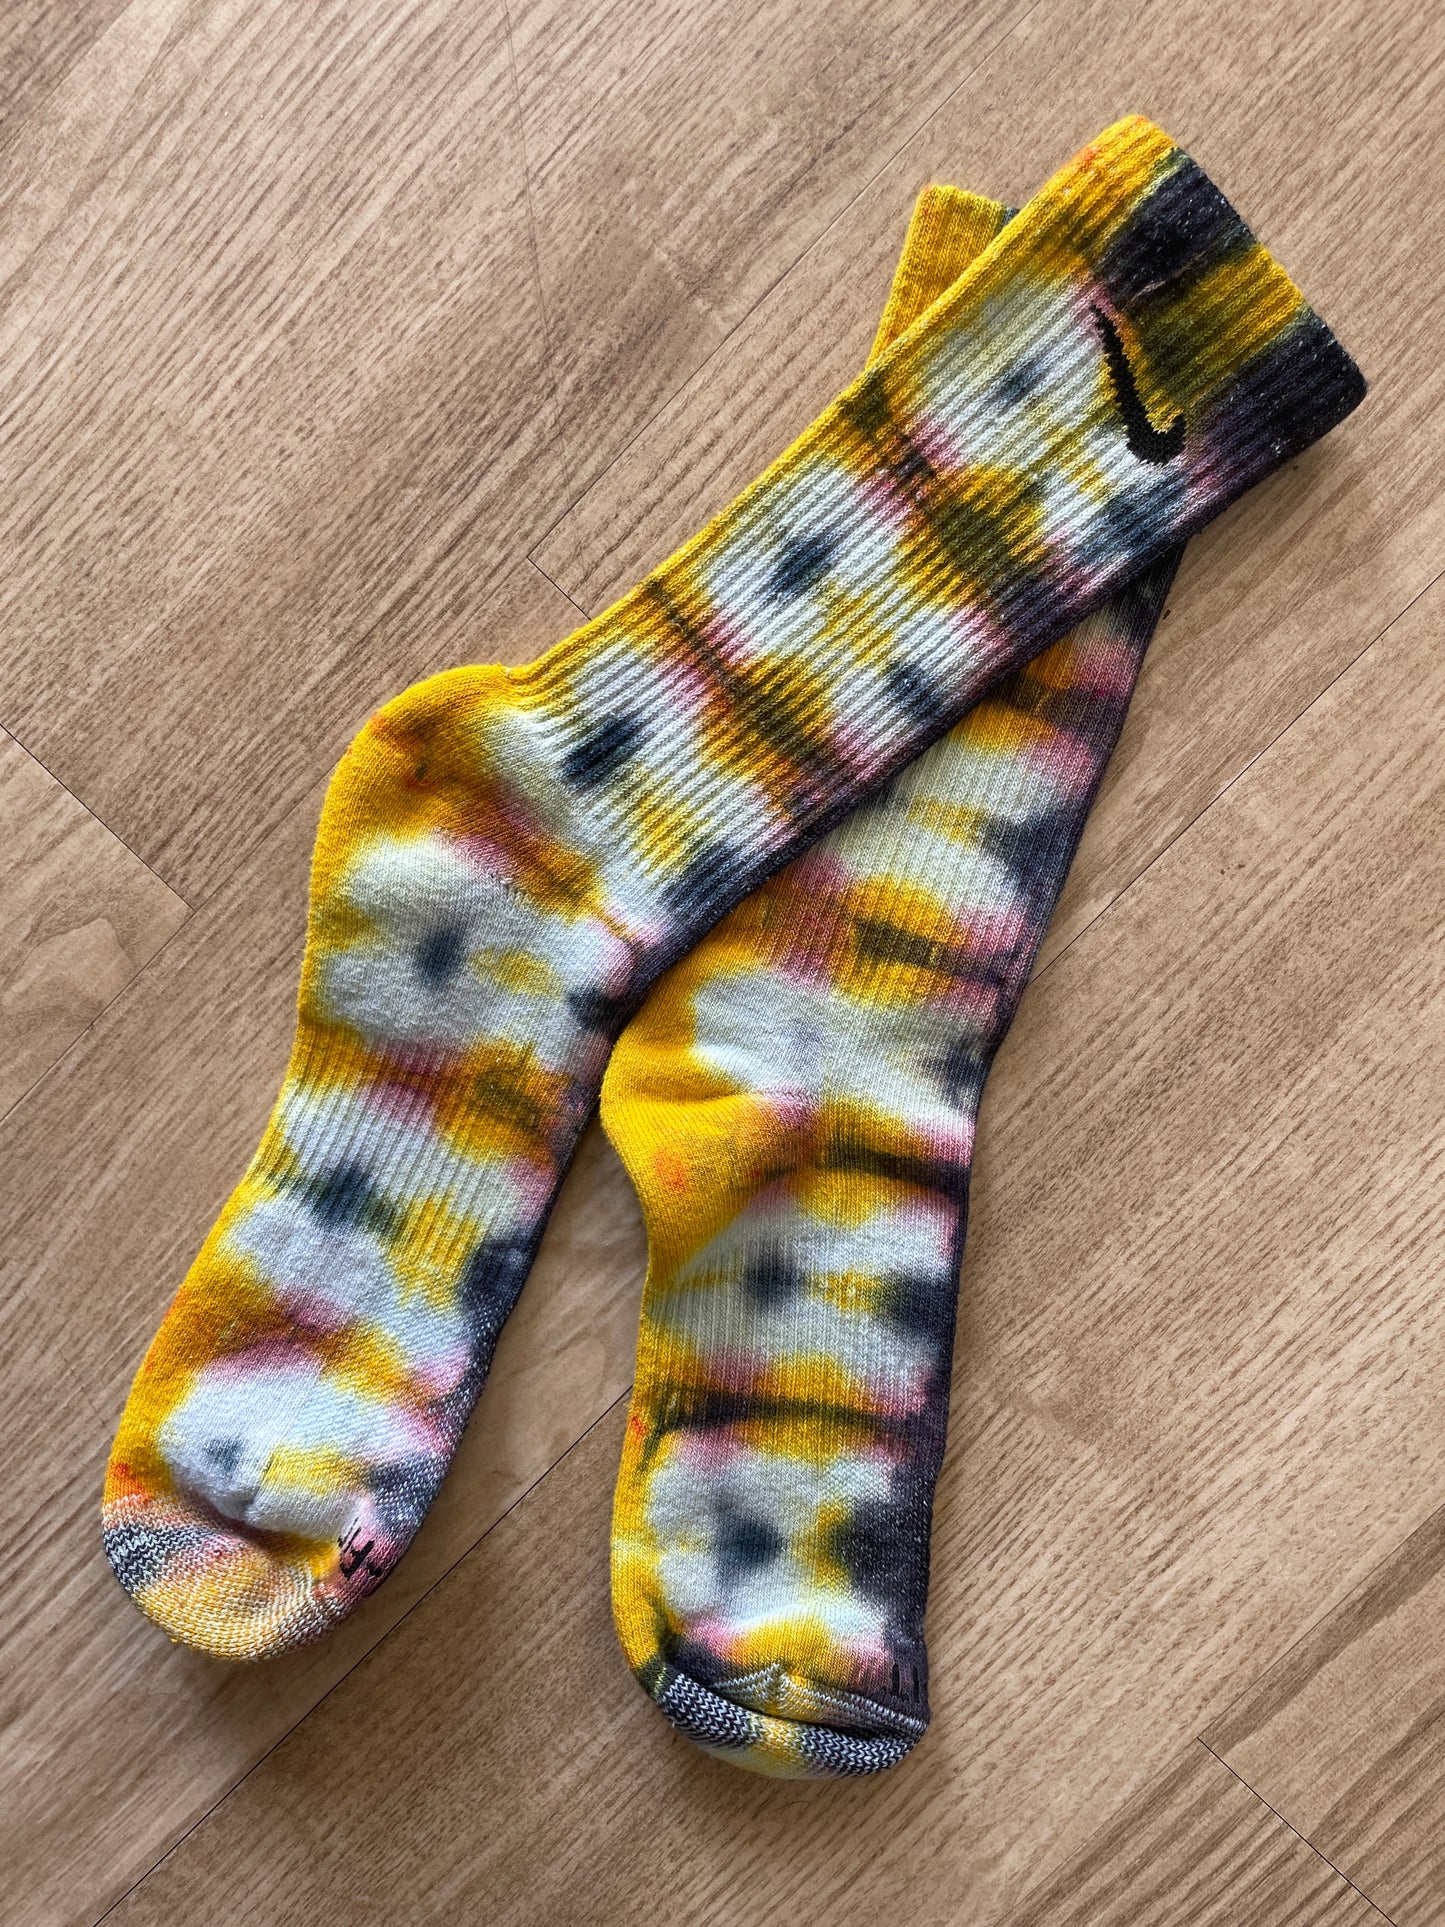 NIKE Socks Hand Tie Dyed Black, Yellow, and Pink Nike Dri-FIT Everyday Plus Crew Training Socks - Size Large (Men's 8-12/Women's 10-13)